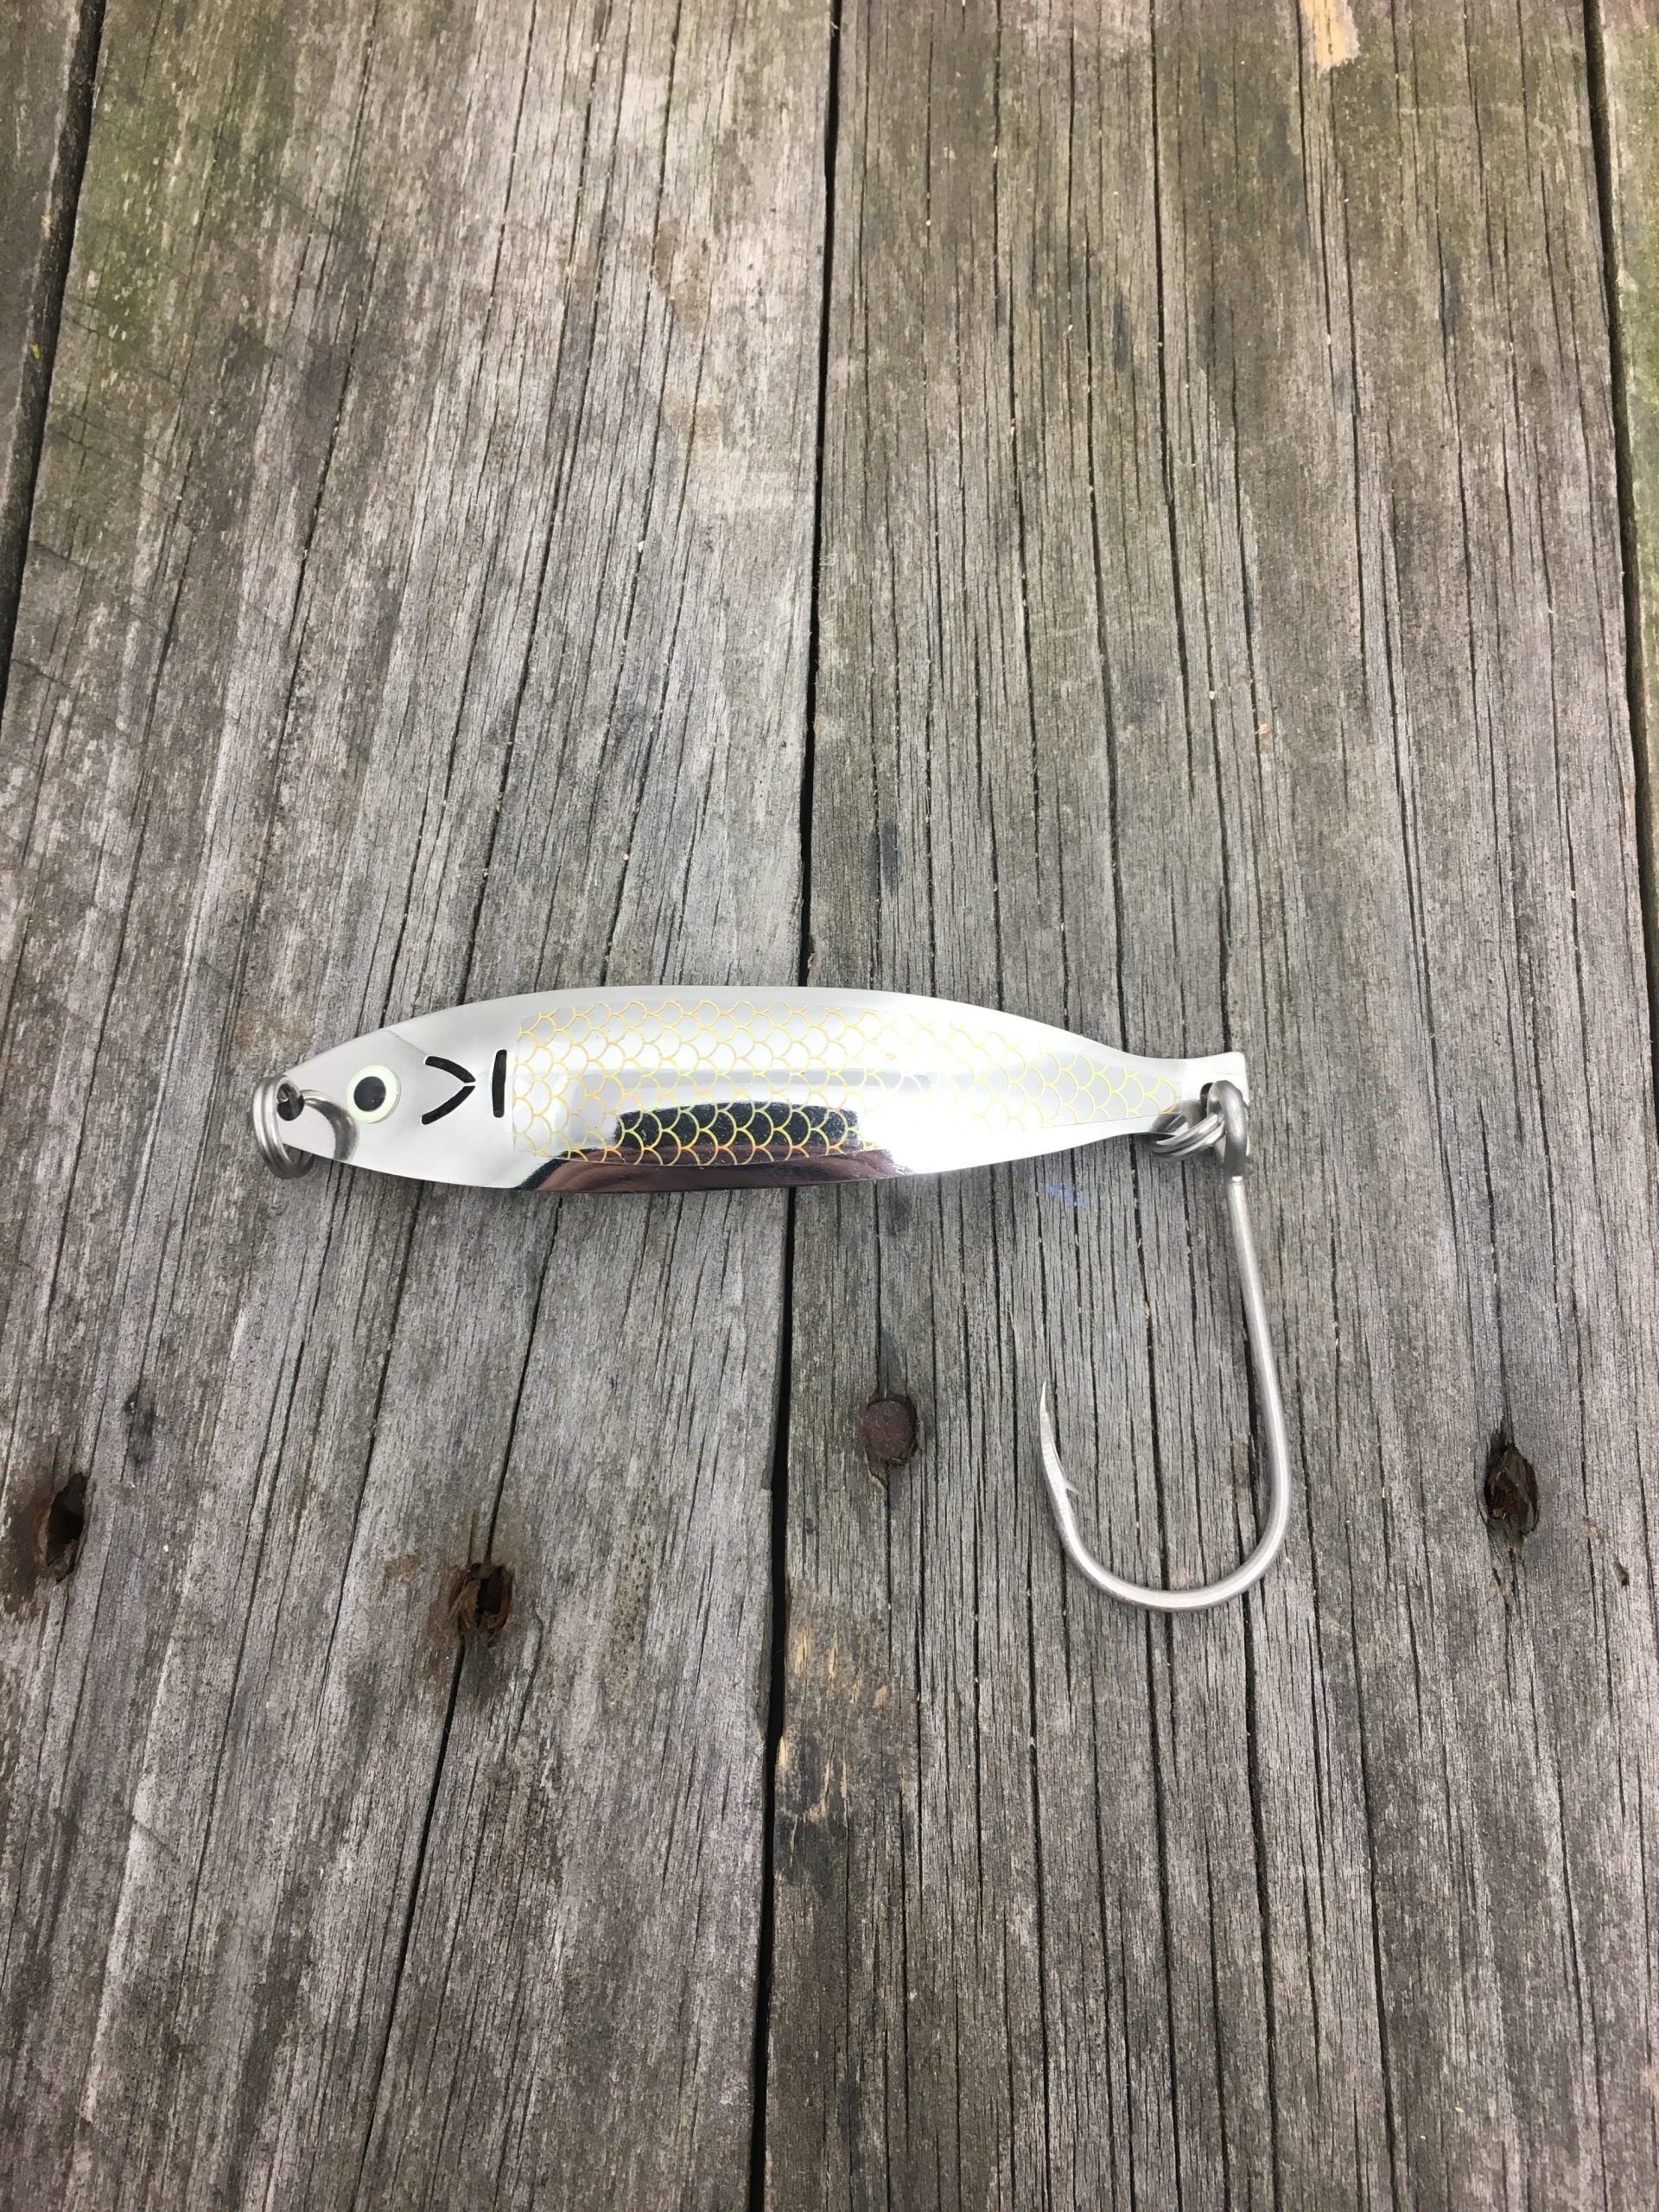 SP-2 The other must have 5 pack of 4 Herring lures